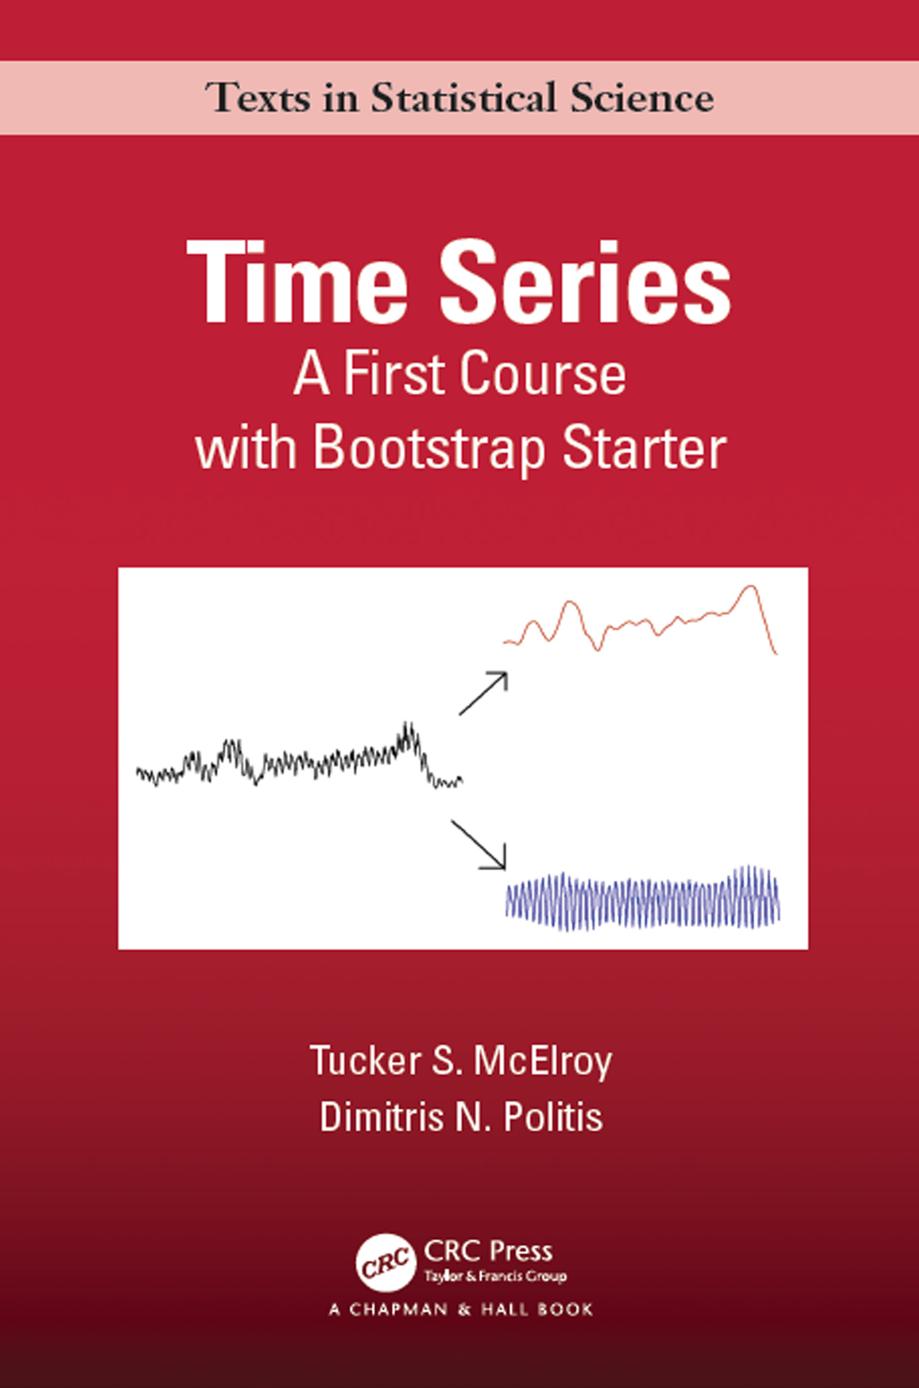 Time Series; A First Course with Bootstrap Starter 1st Edition  by Tucker S. McElroy  ，Dimitris N. Politis